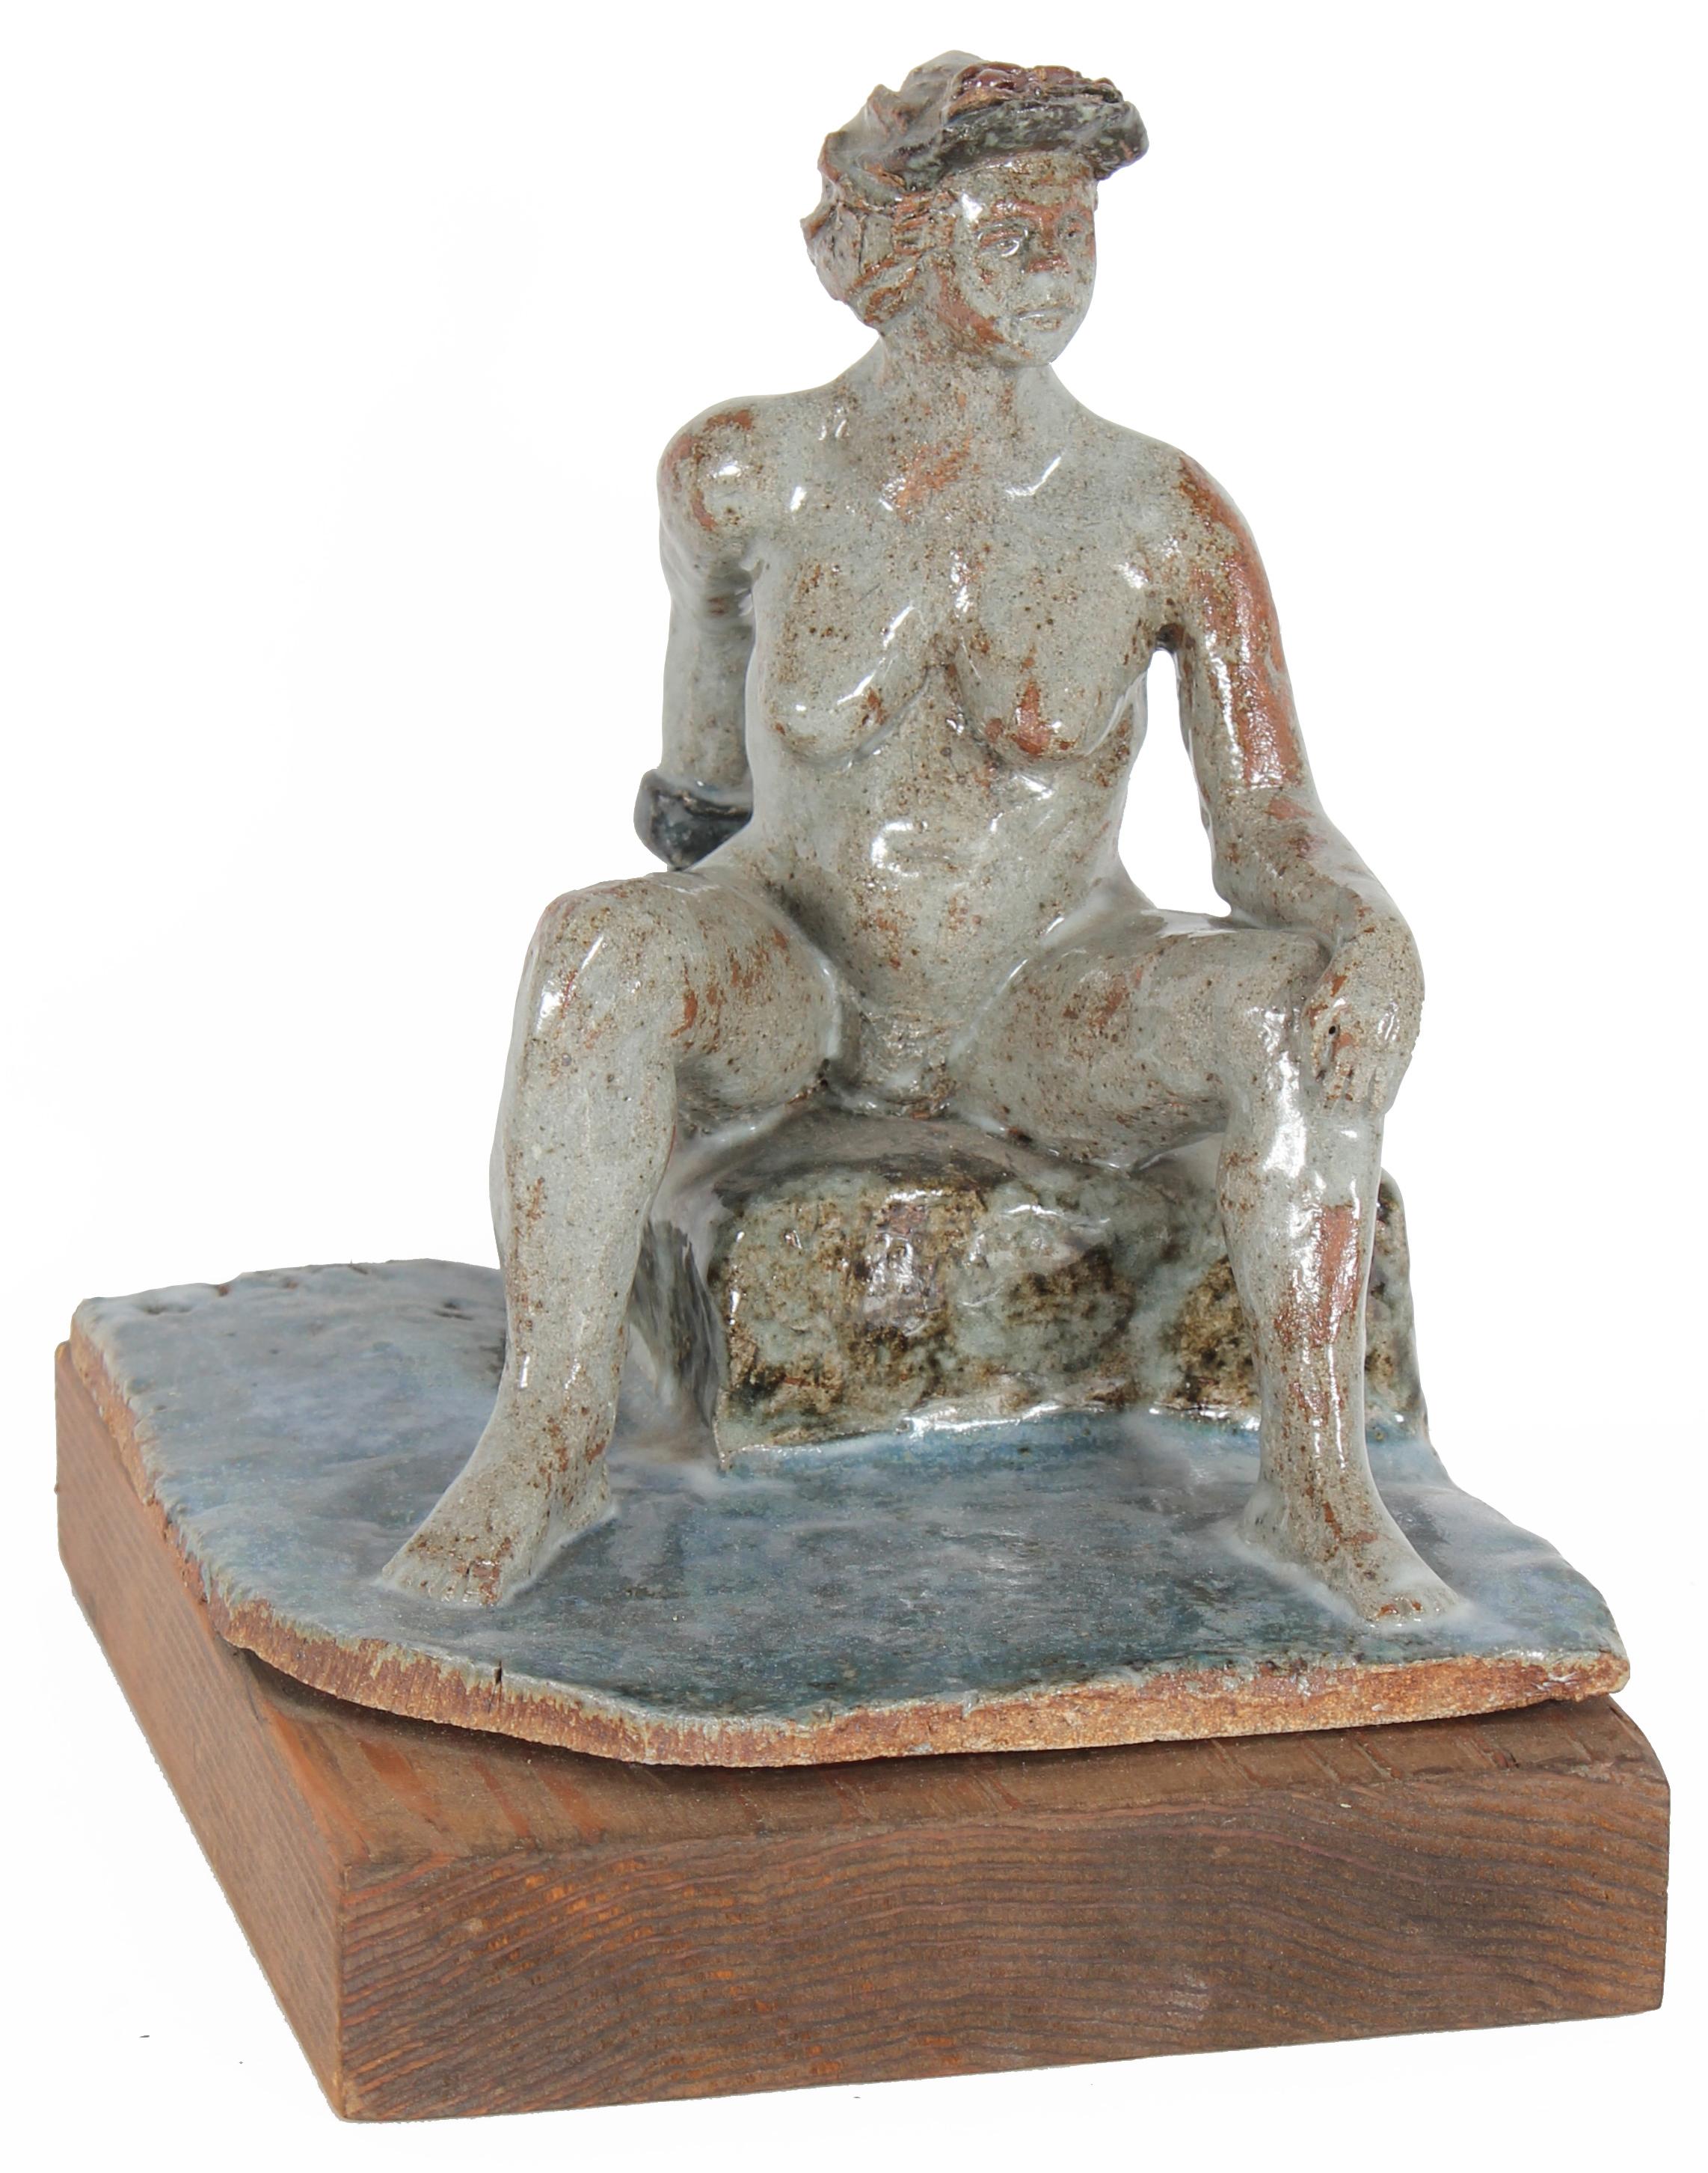 Dave Fox Figurative Sculpture - Seated Nude Female Figure Ceramic Sculpture with Turquoise, Gray and Brown